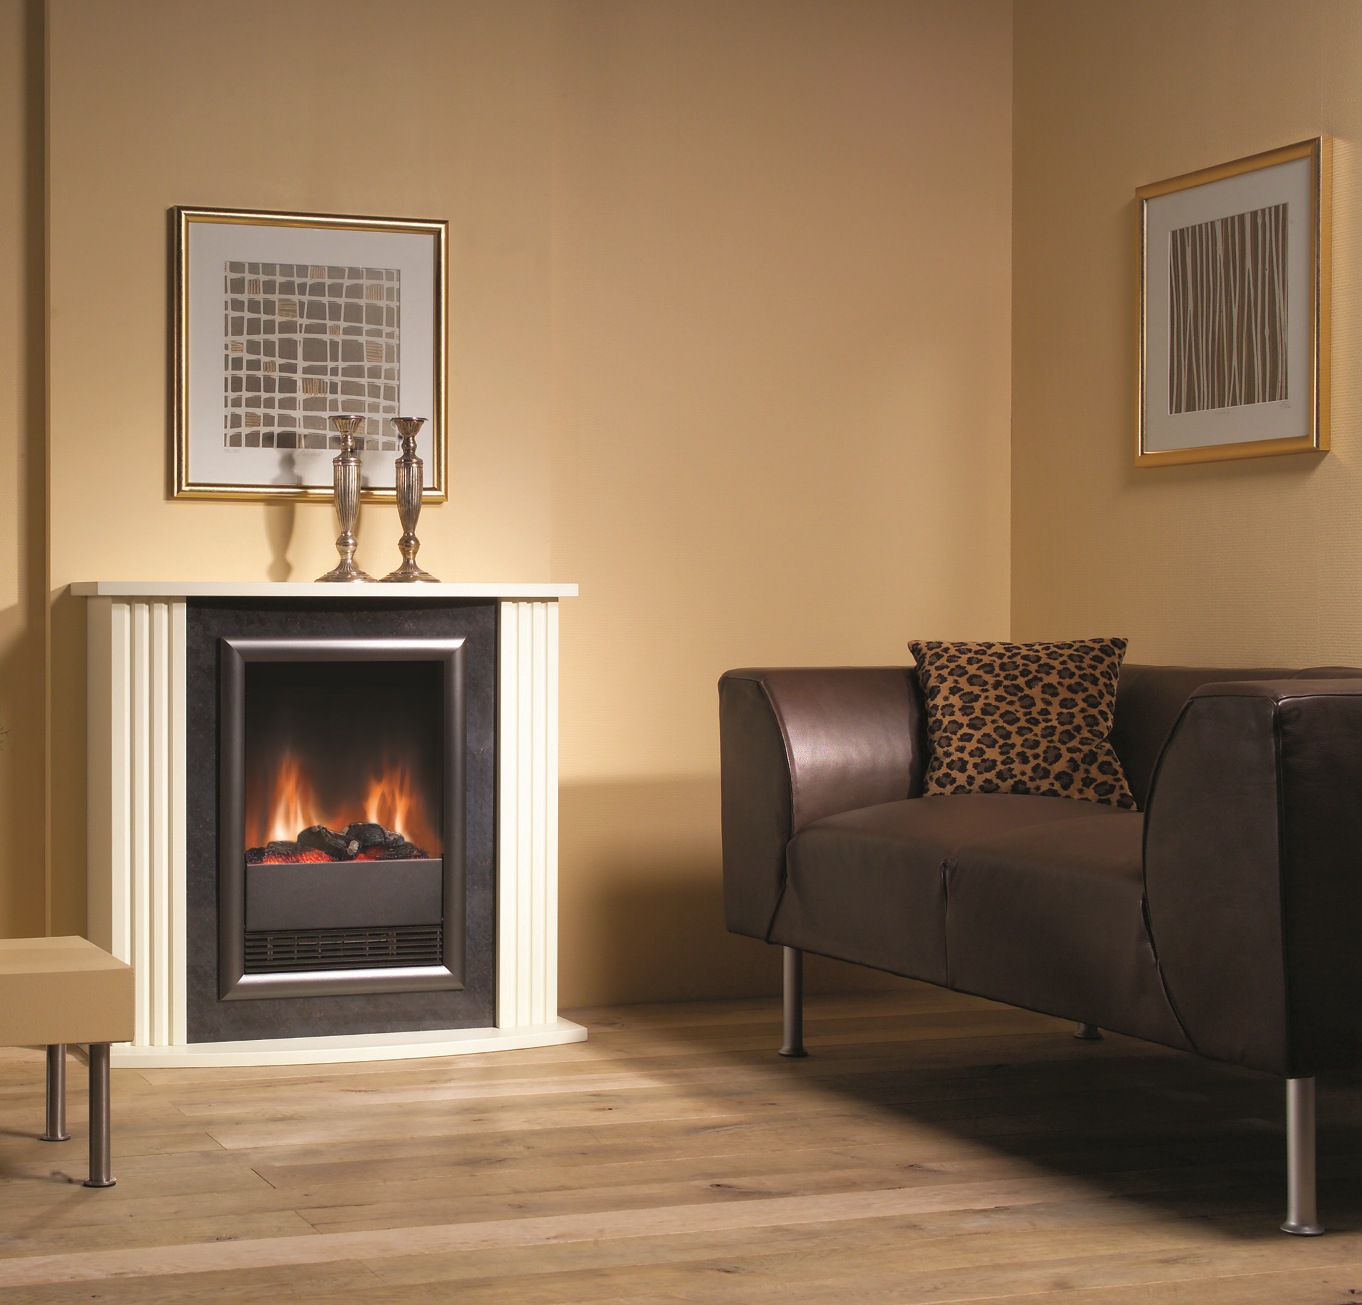 Lot 20 legislation will raise the standard of electric fires for social housing